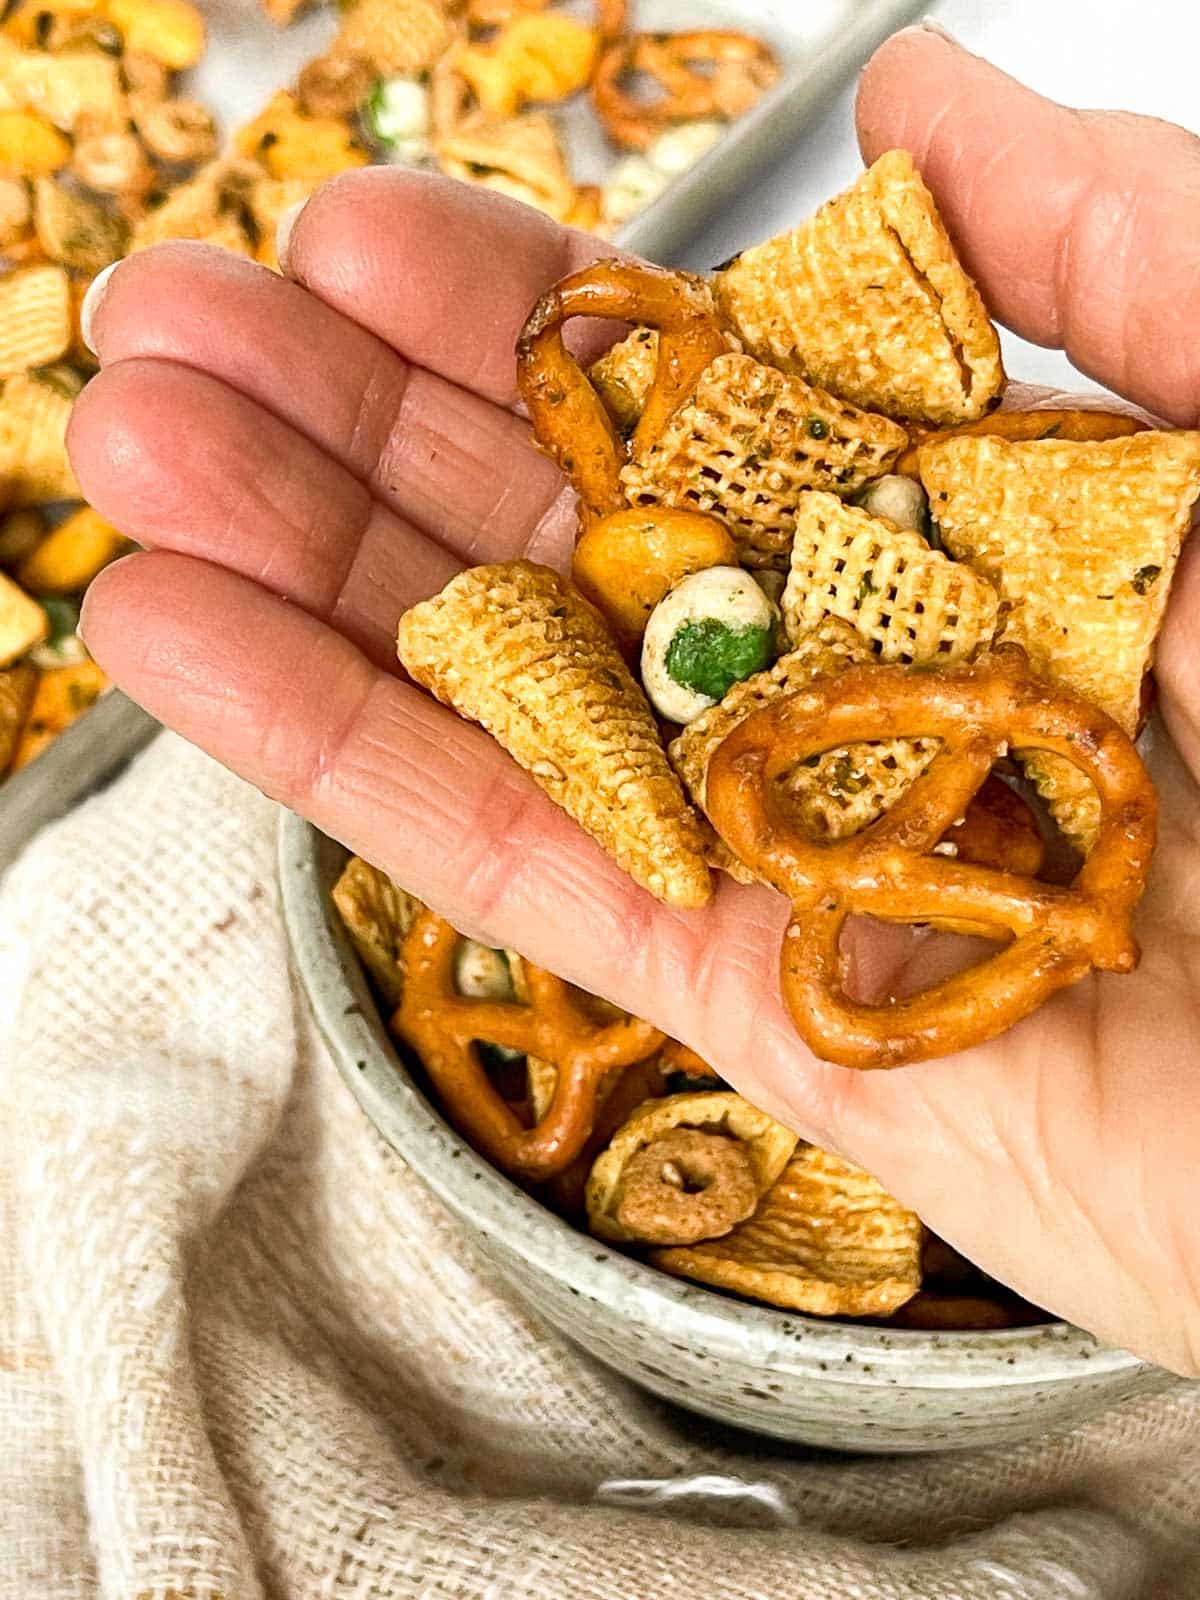 A hand holding Furikake Chex Mix above a bowl of Chex mix and a napkin.